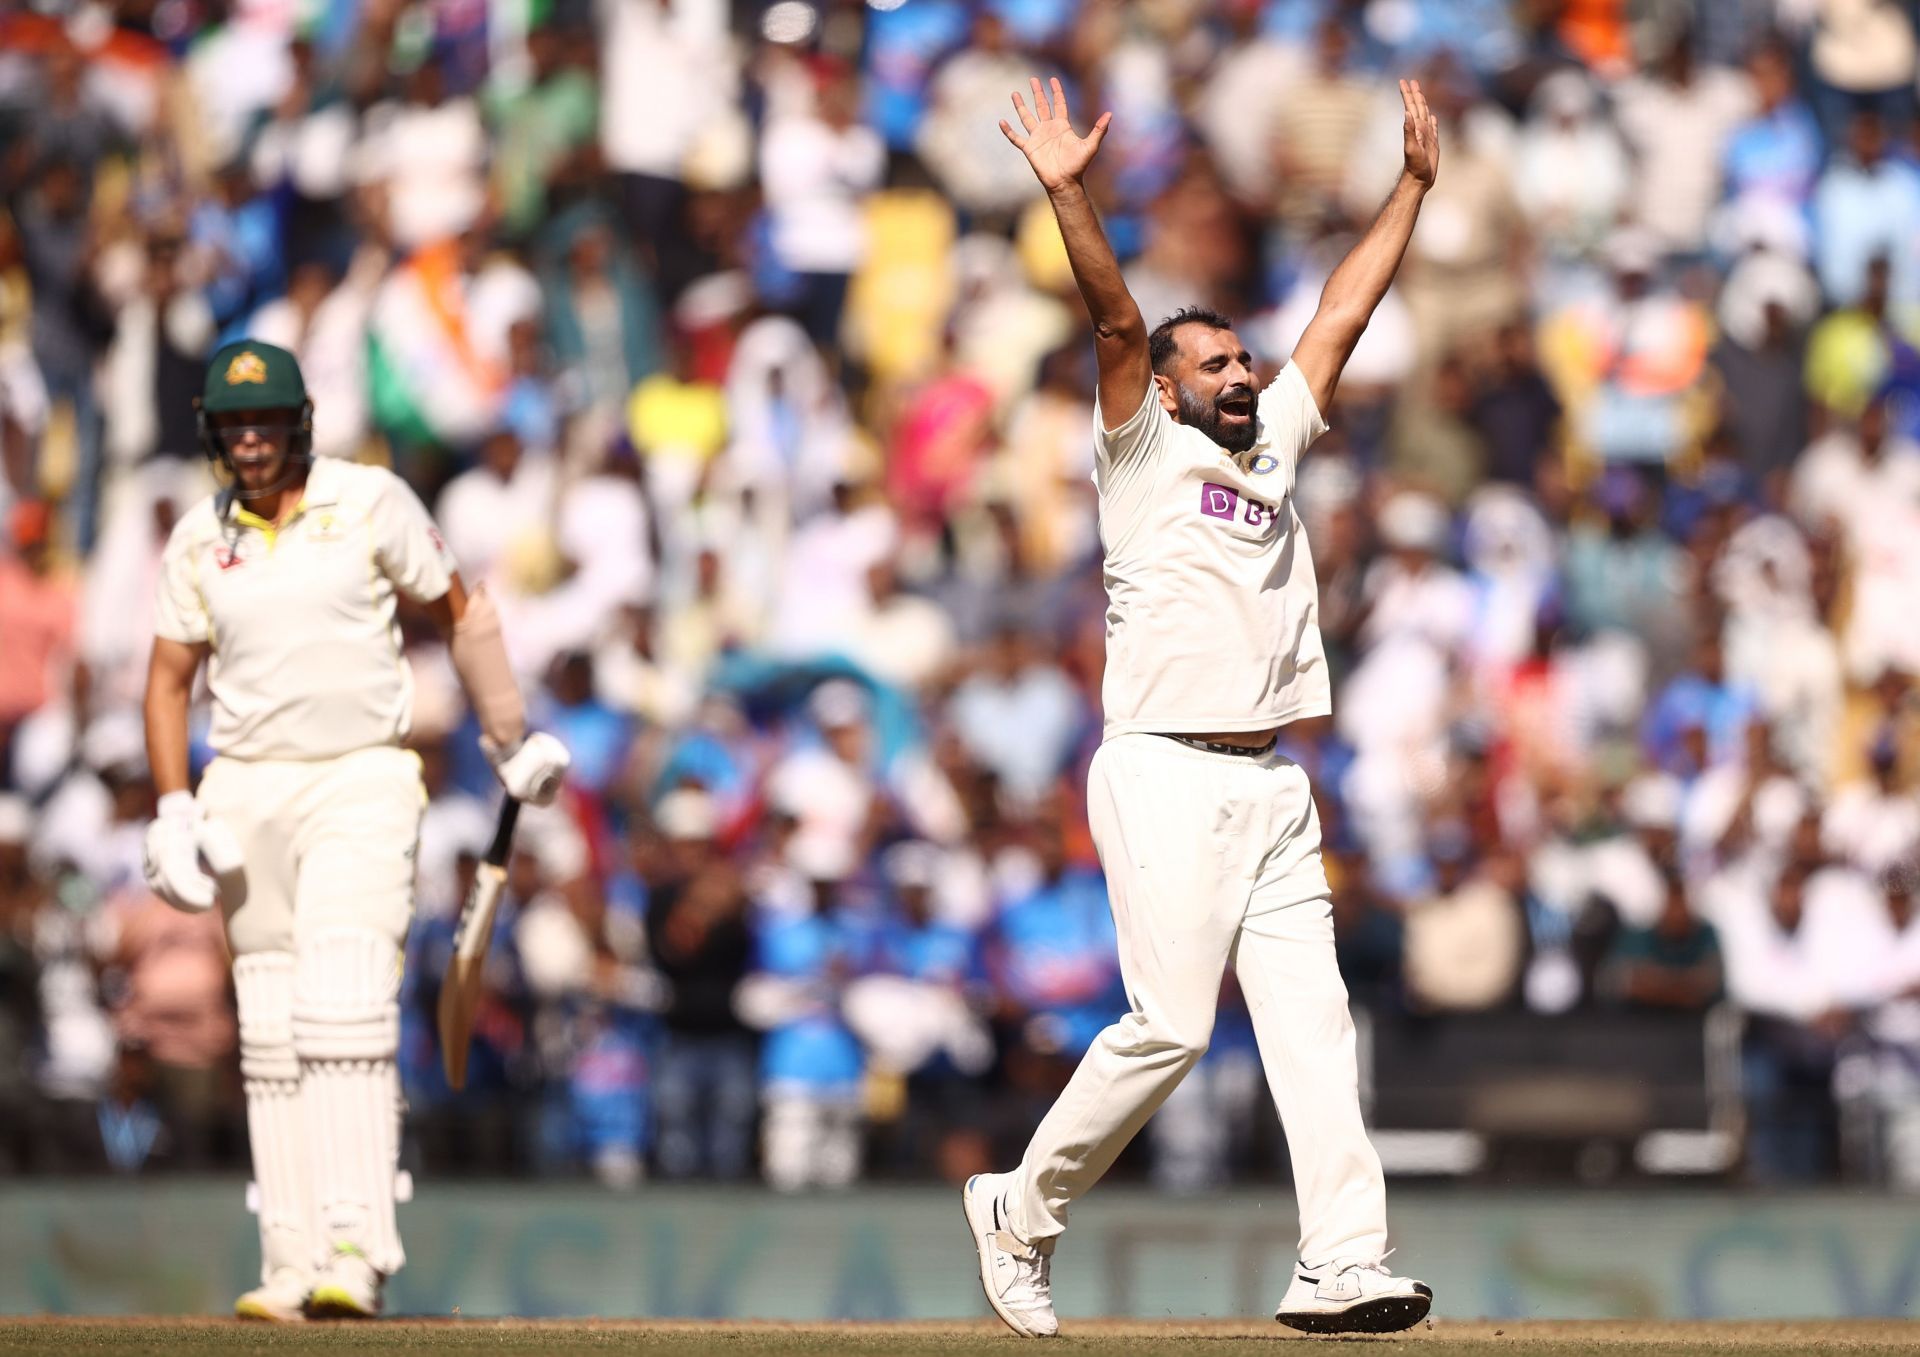 Mohammed Shami gave his team a brilliant start in the first innings of the Nagpur Test